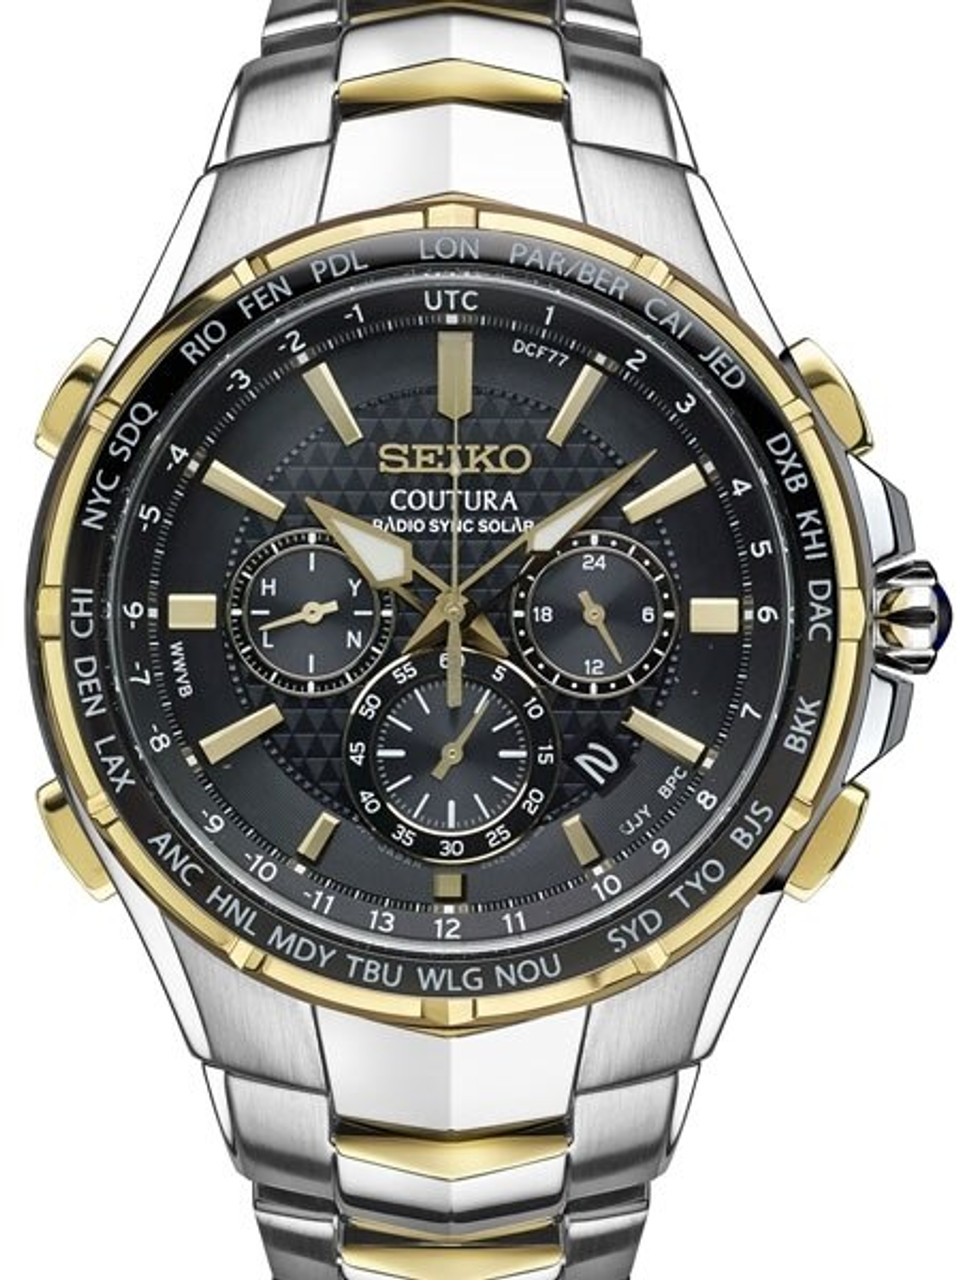 Seiko Radio-Controlled, Solar Powered Chronograph Watch with 45mm 